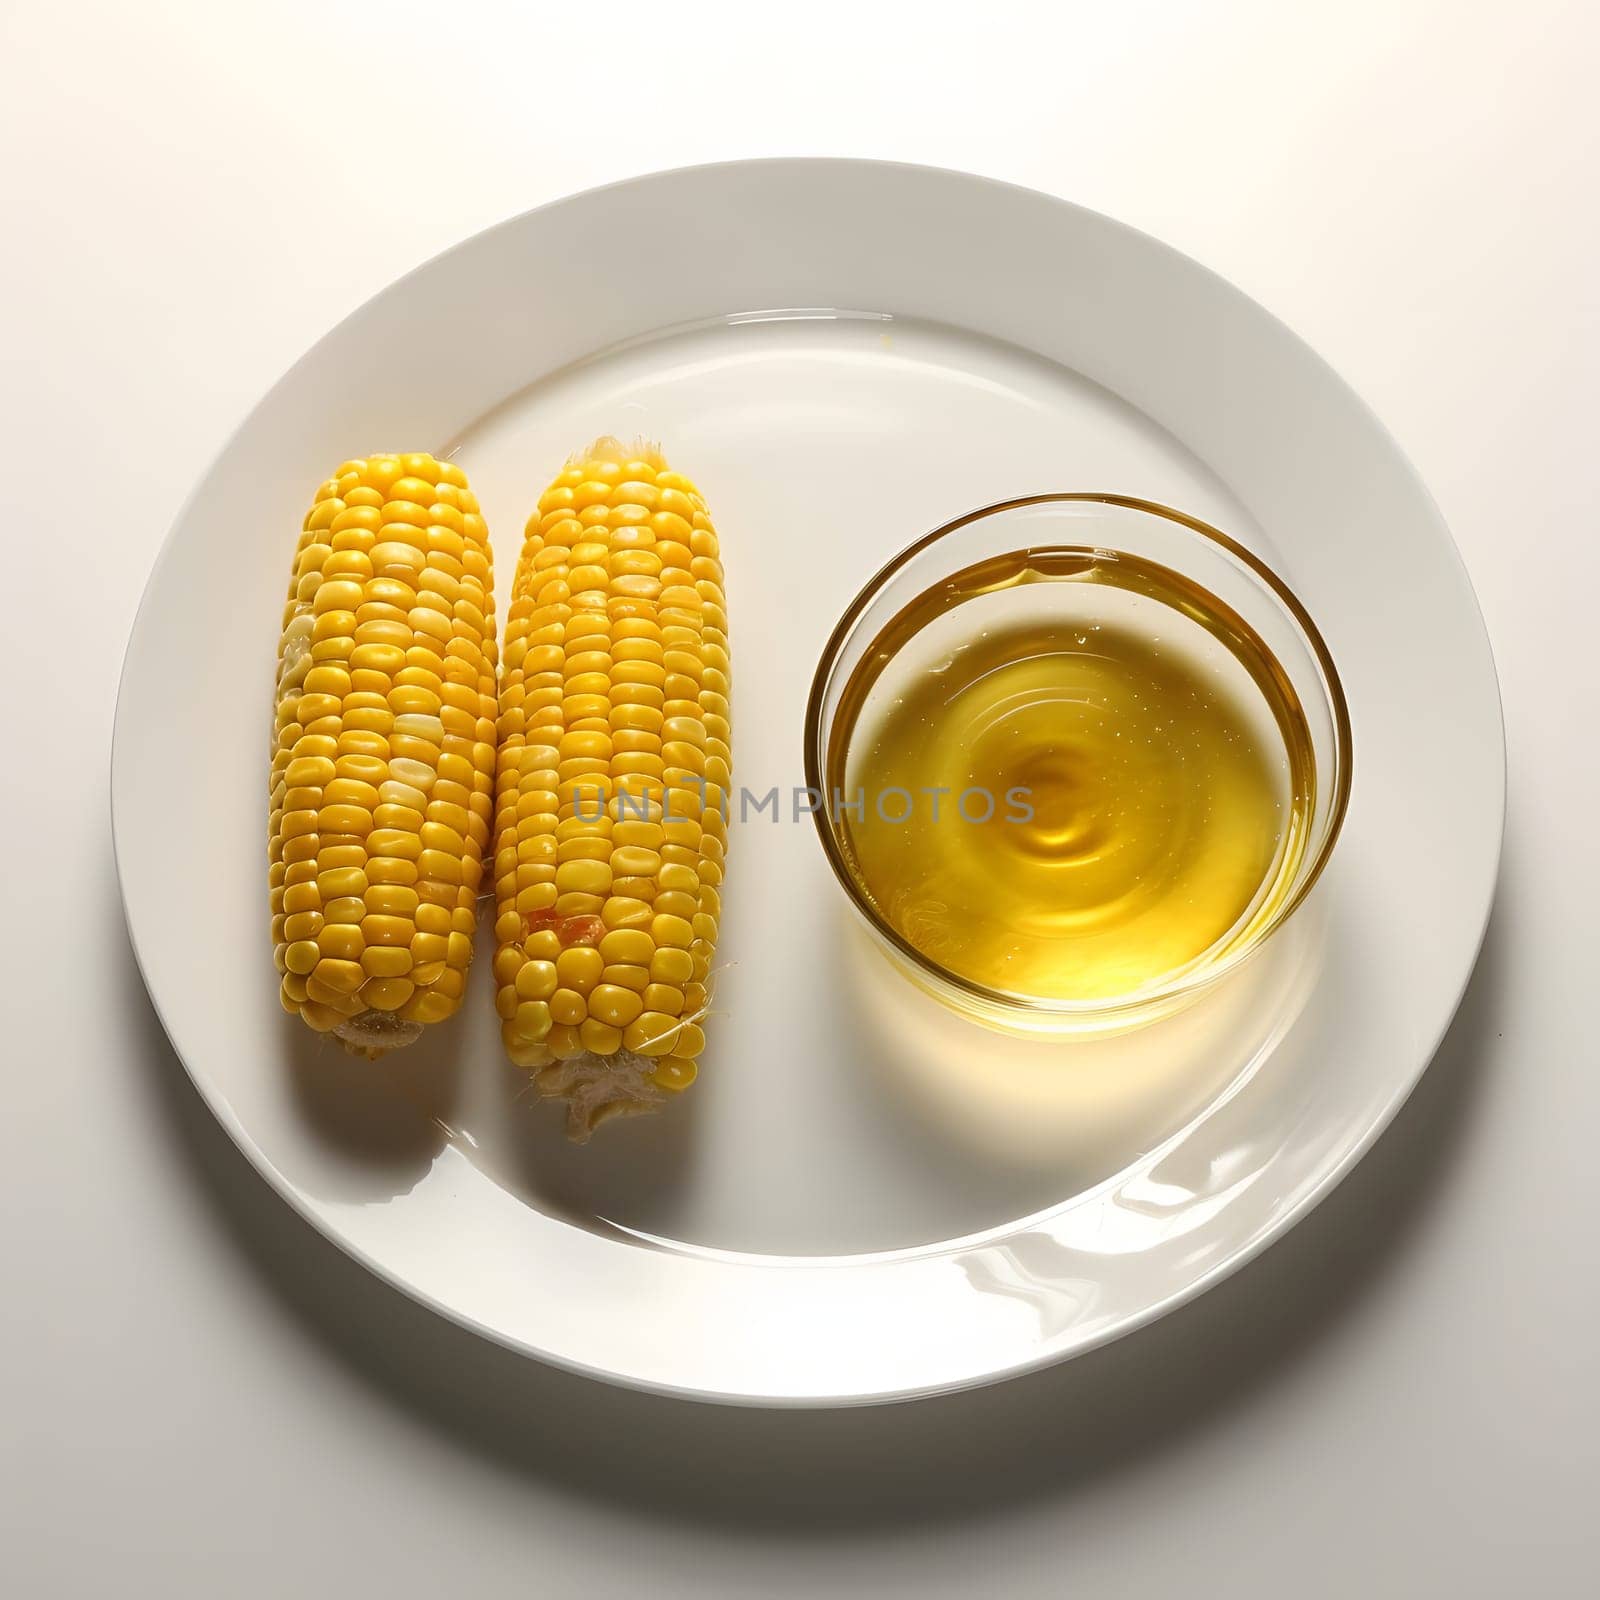 Oil in a glass and age of small corn cobs on a plate. Corn as a dish of thanksgiving for the harvest, a picture on a white isolated background. An atmosphere of joy and celebration.